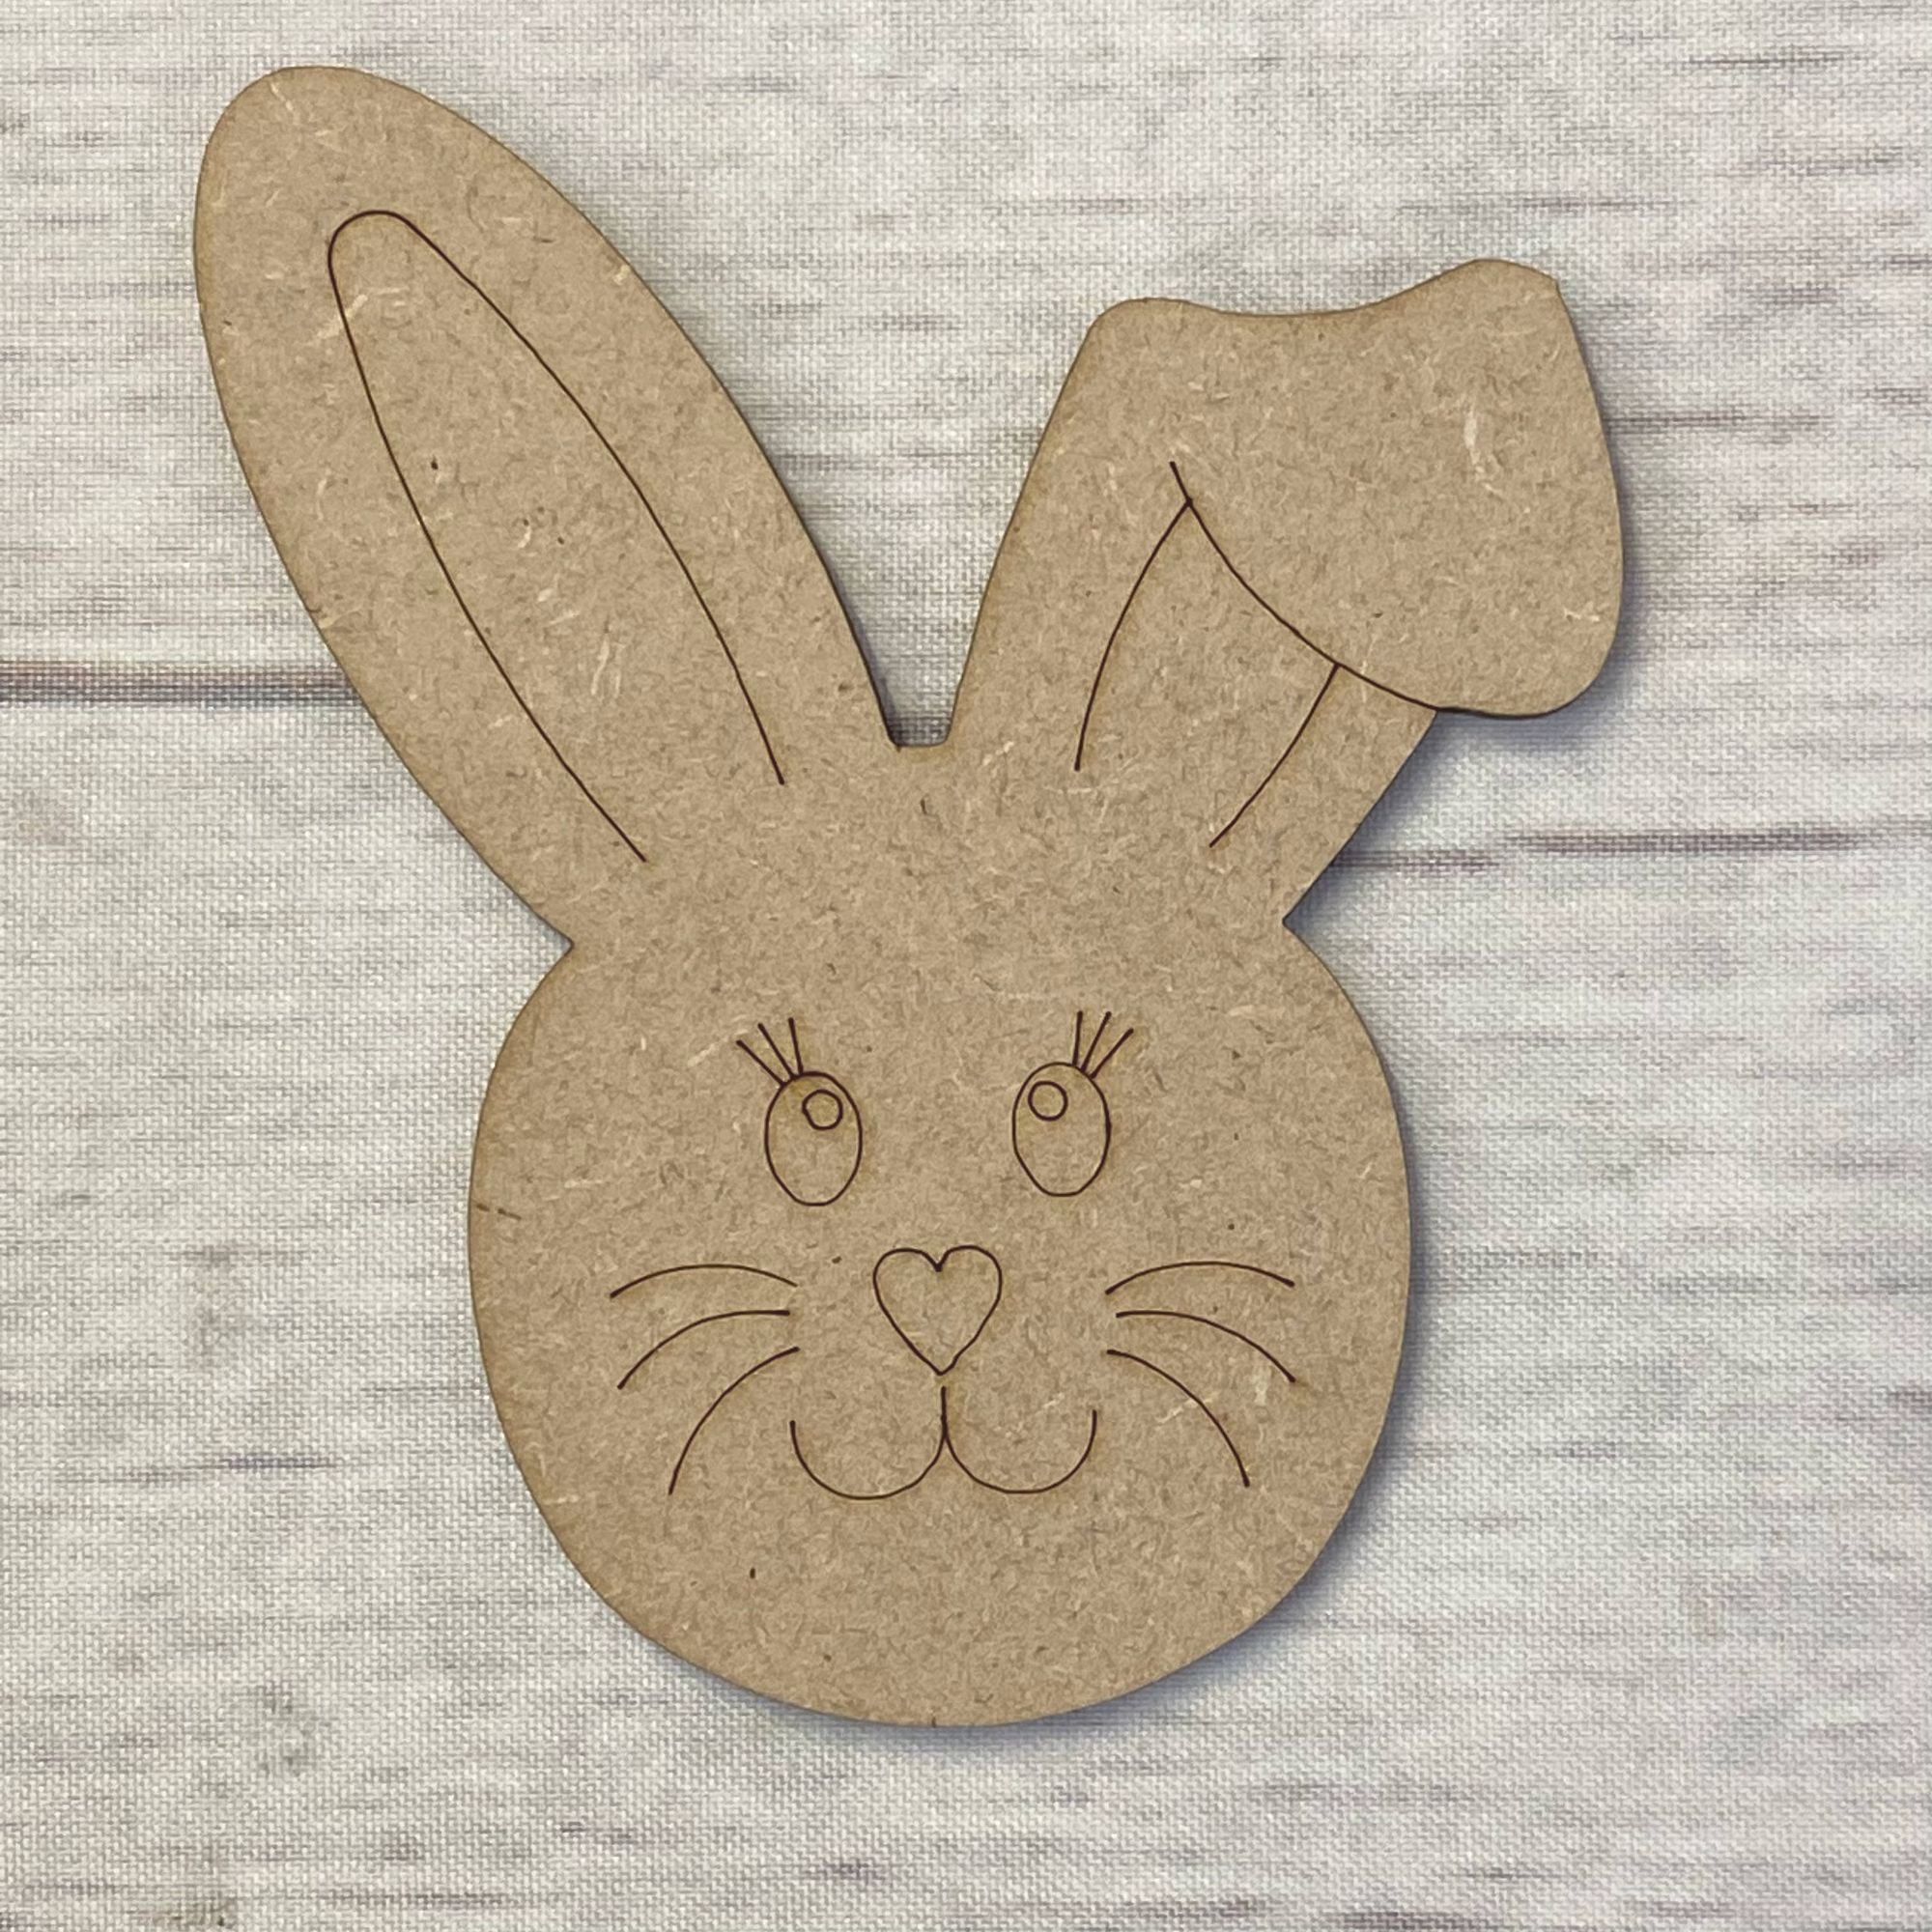 Rabbit 6 - engraved (Face)